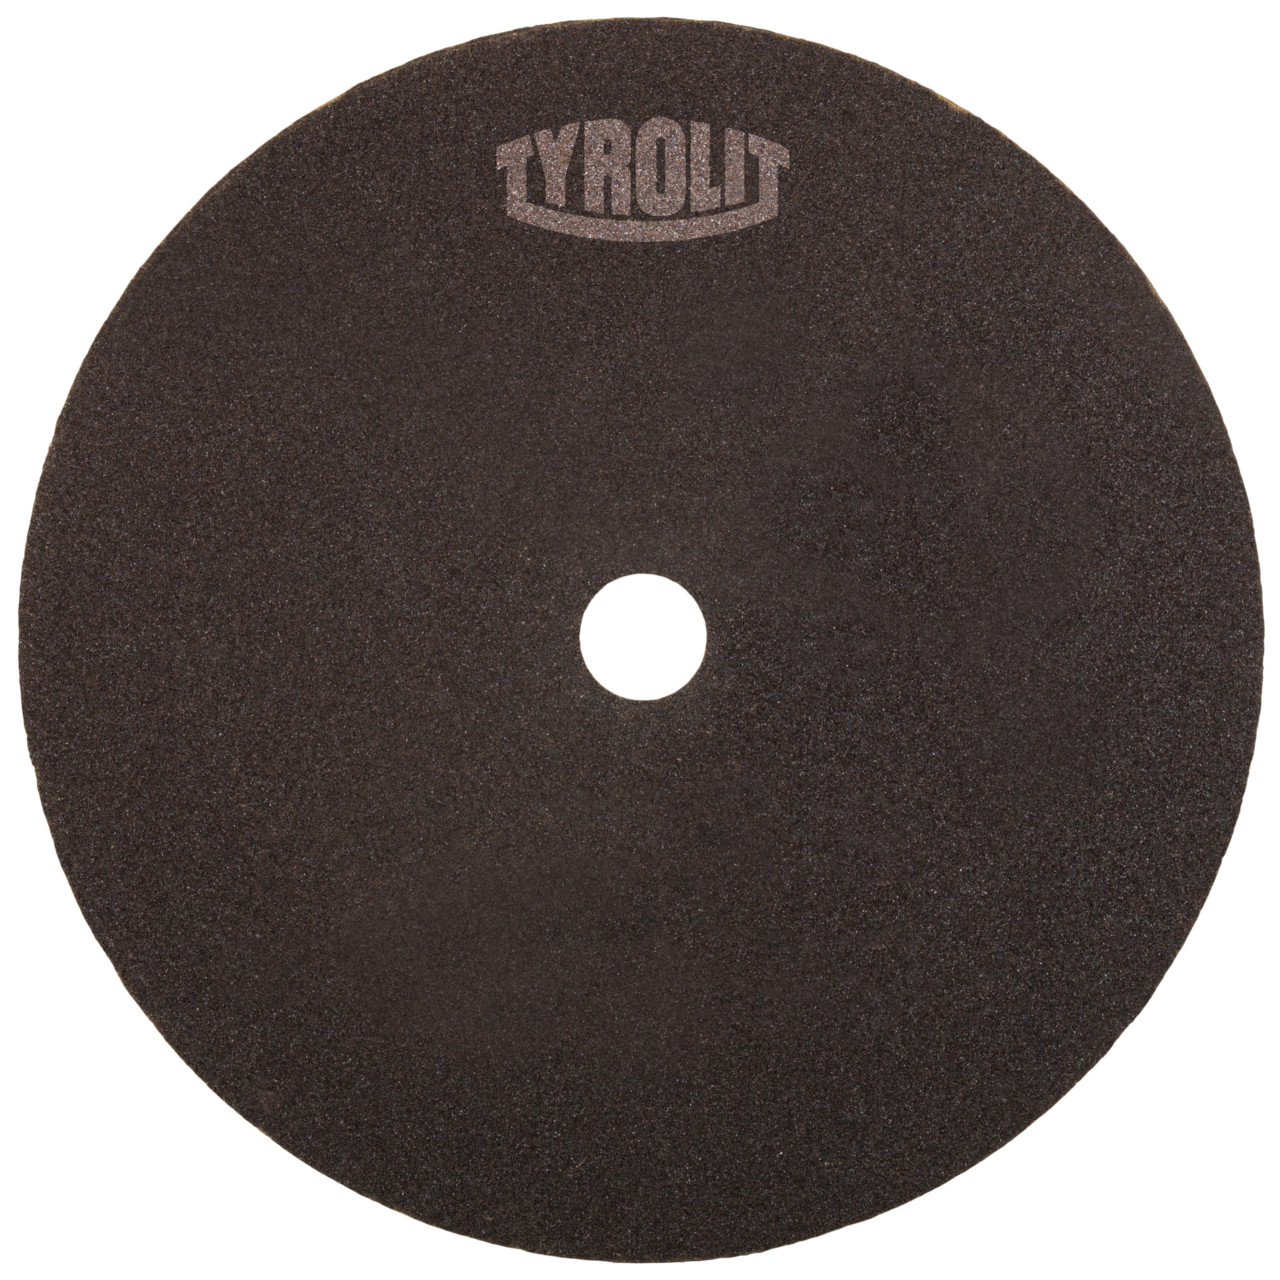 Tyrolit Cutting disc for cutting and saw sharpening DxDxH 300x2x32 For steel and HSS, shape: 41N - straight version (non-woven cutting disc), Art. 60572